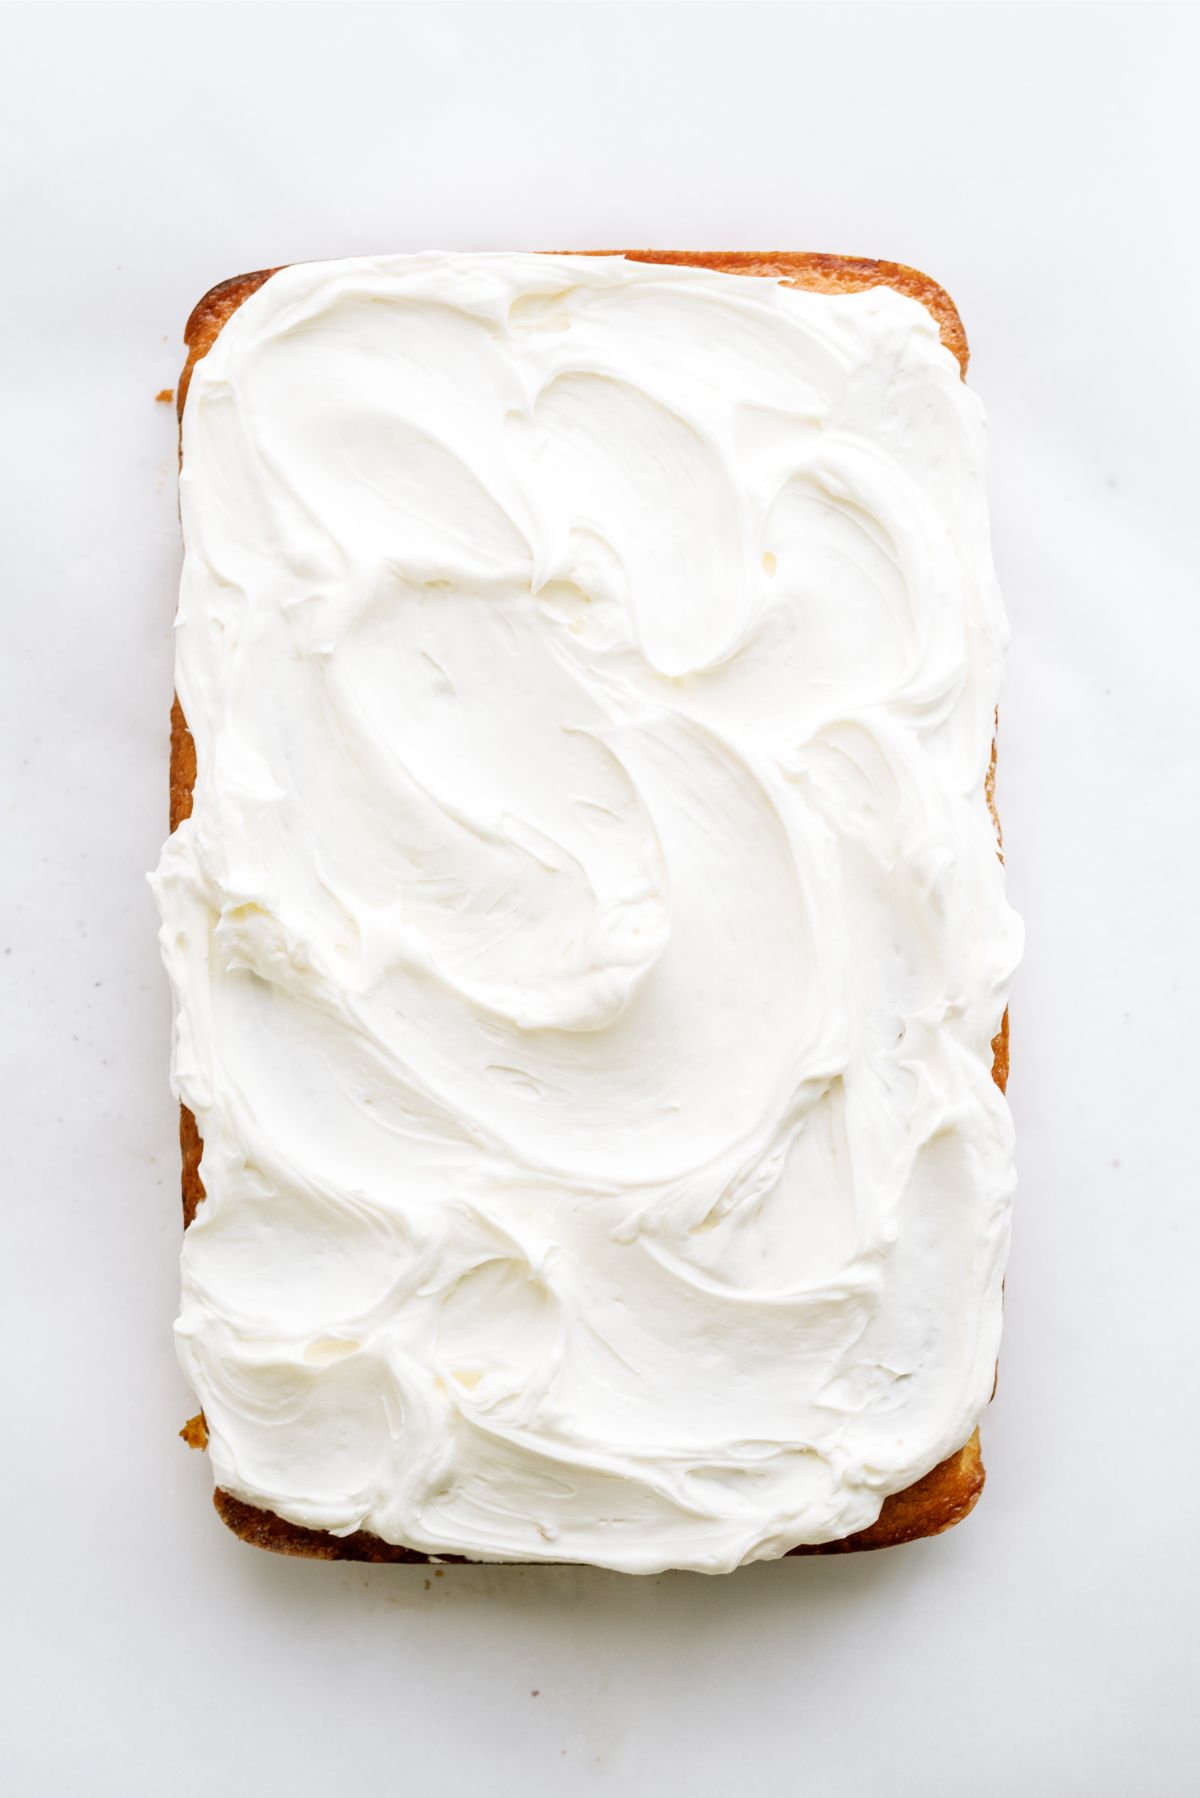 Pumpkin Layered Magic Cake with frosting